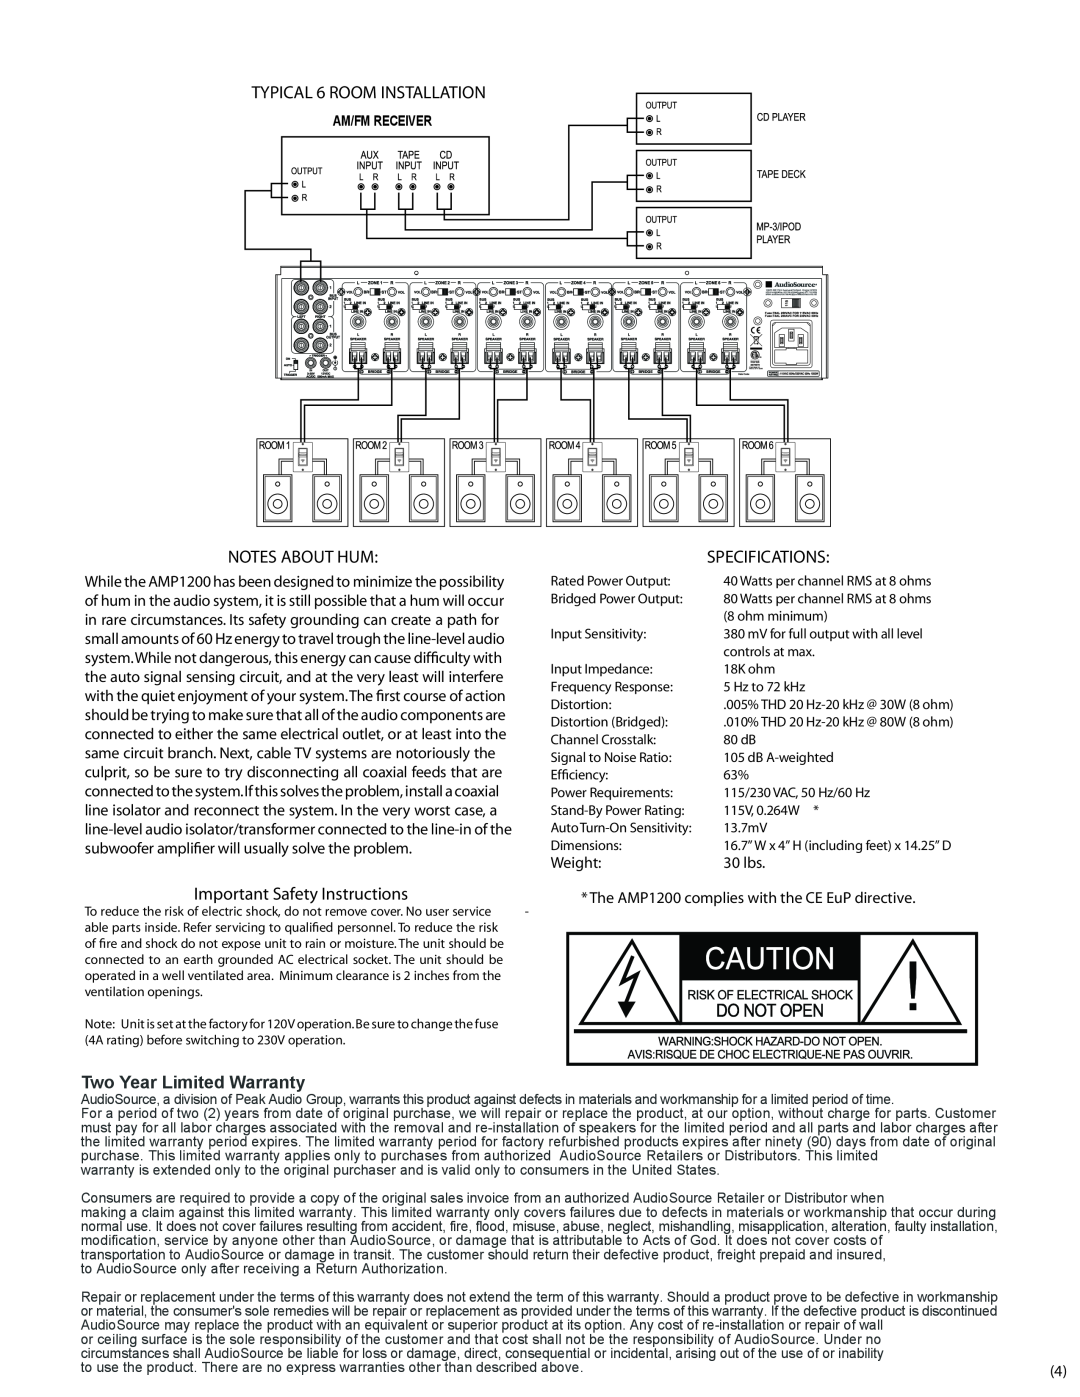 AudioSource AMP1200 TYPICAL 6 ROOM INSTALLATION, Notes About Hum, Important Safety Instructions, Specifications, Weight 